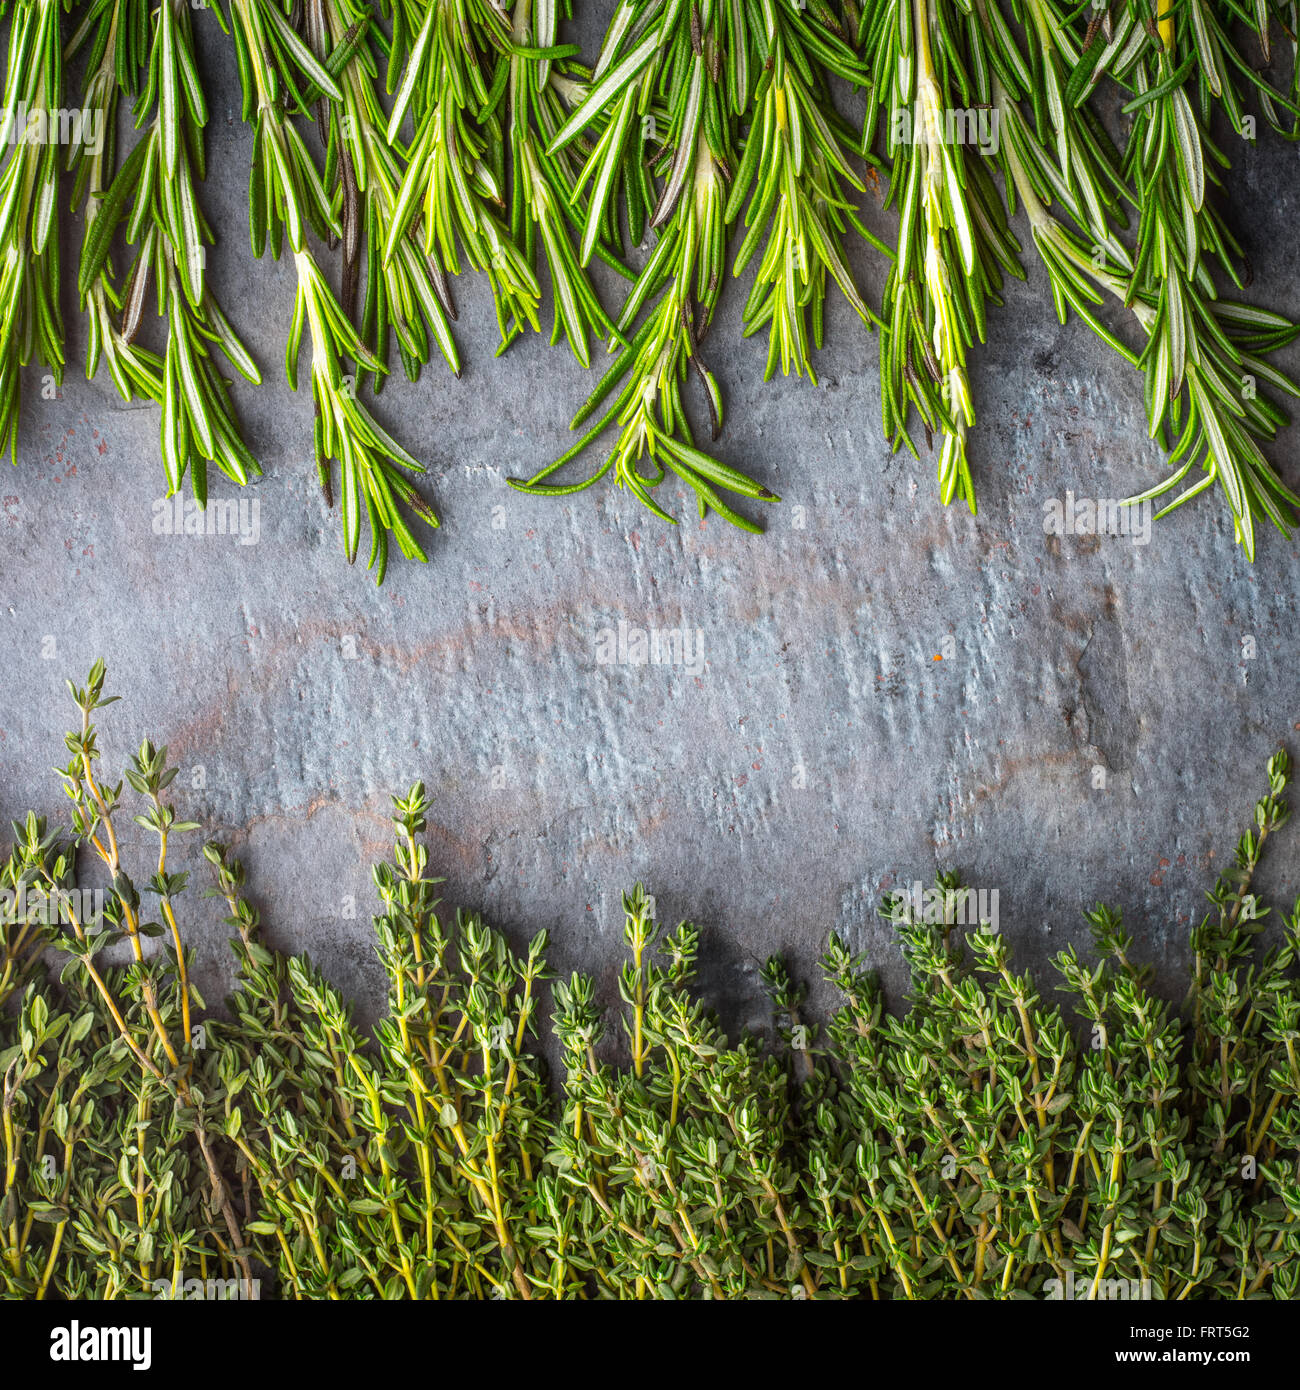 Thyme  and rosemary sprigs on the stone table square Stock Photo